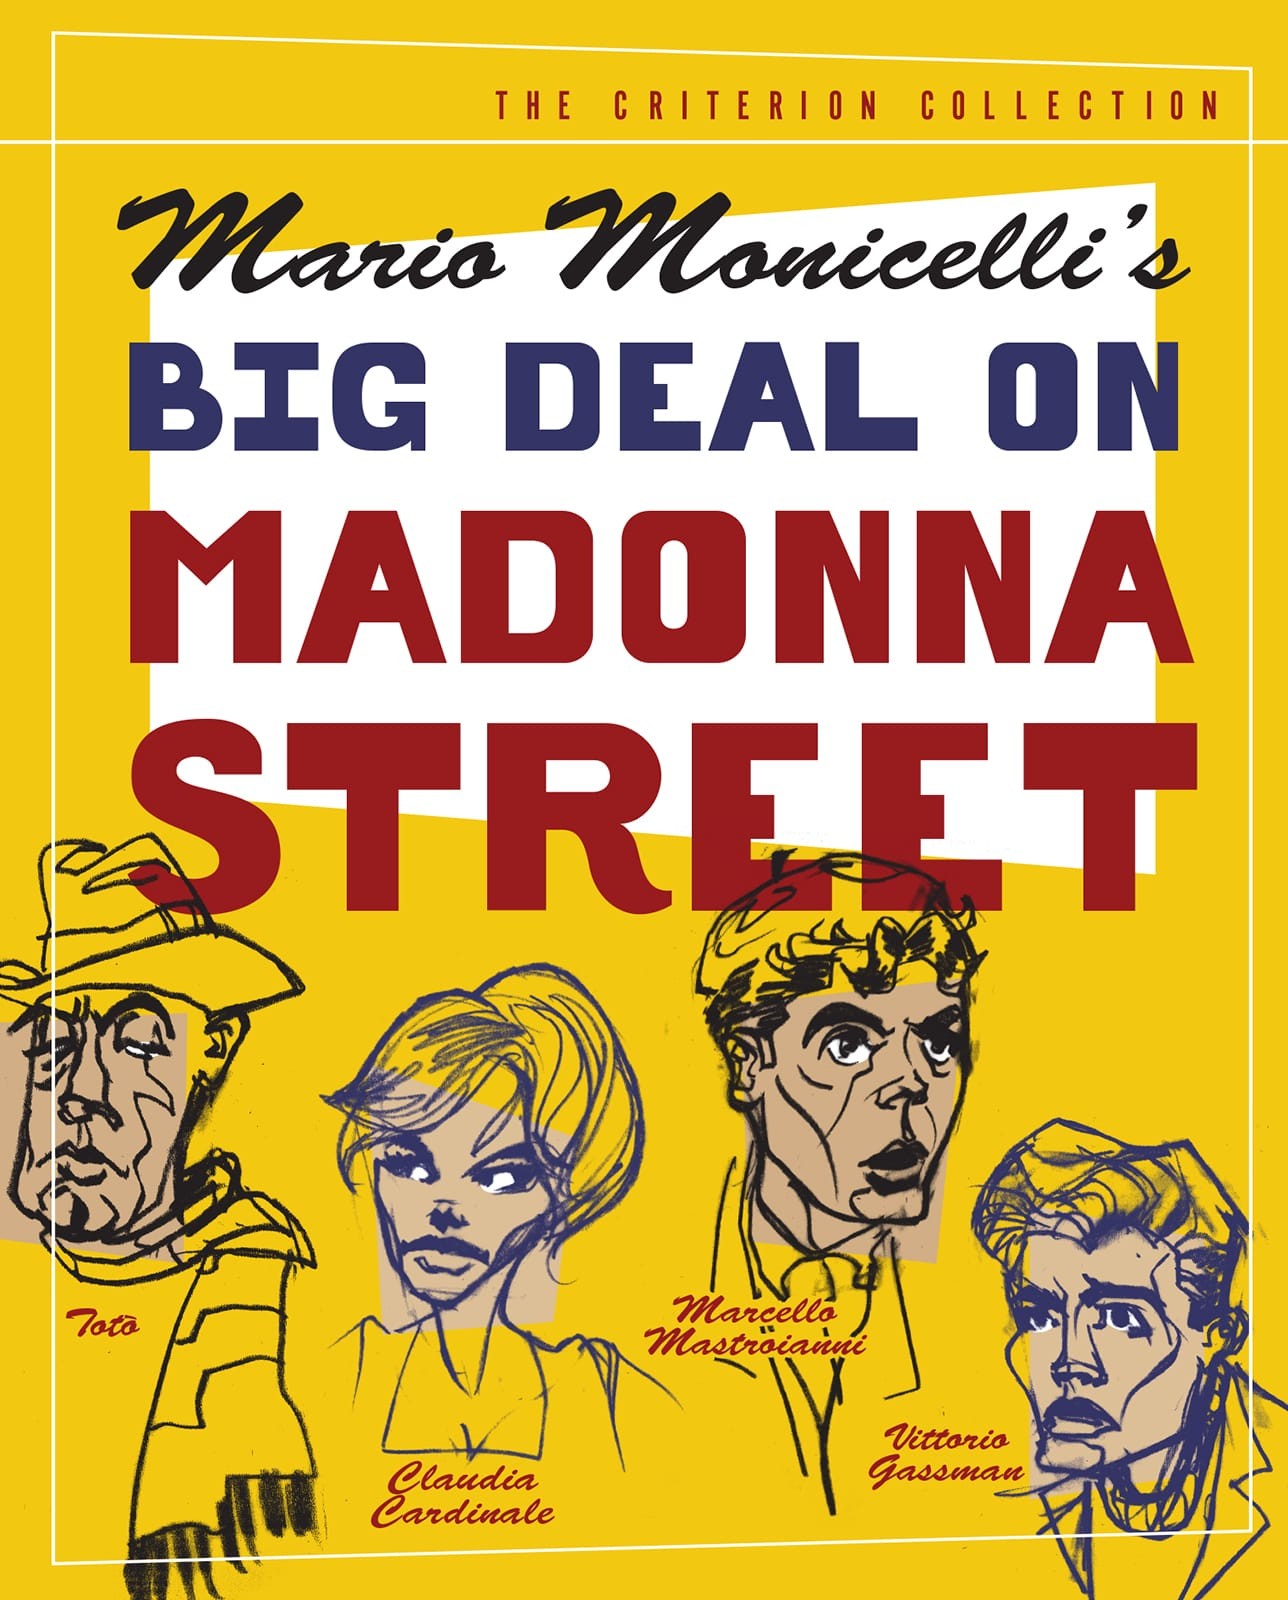 Big Deal on Madonna Street (1958) | The Criterion Collection